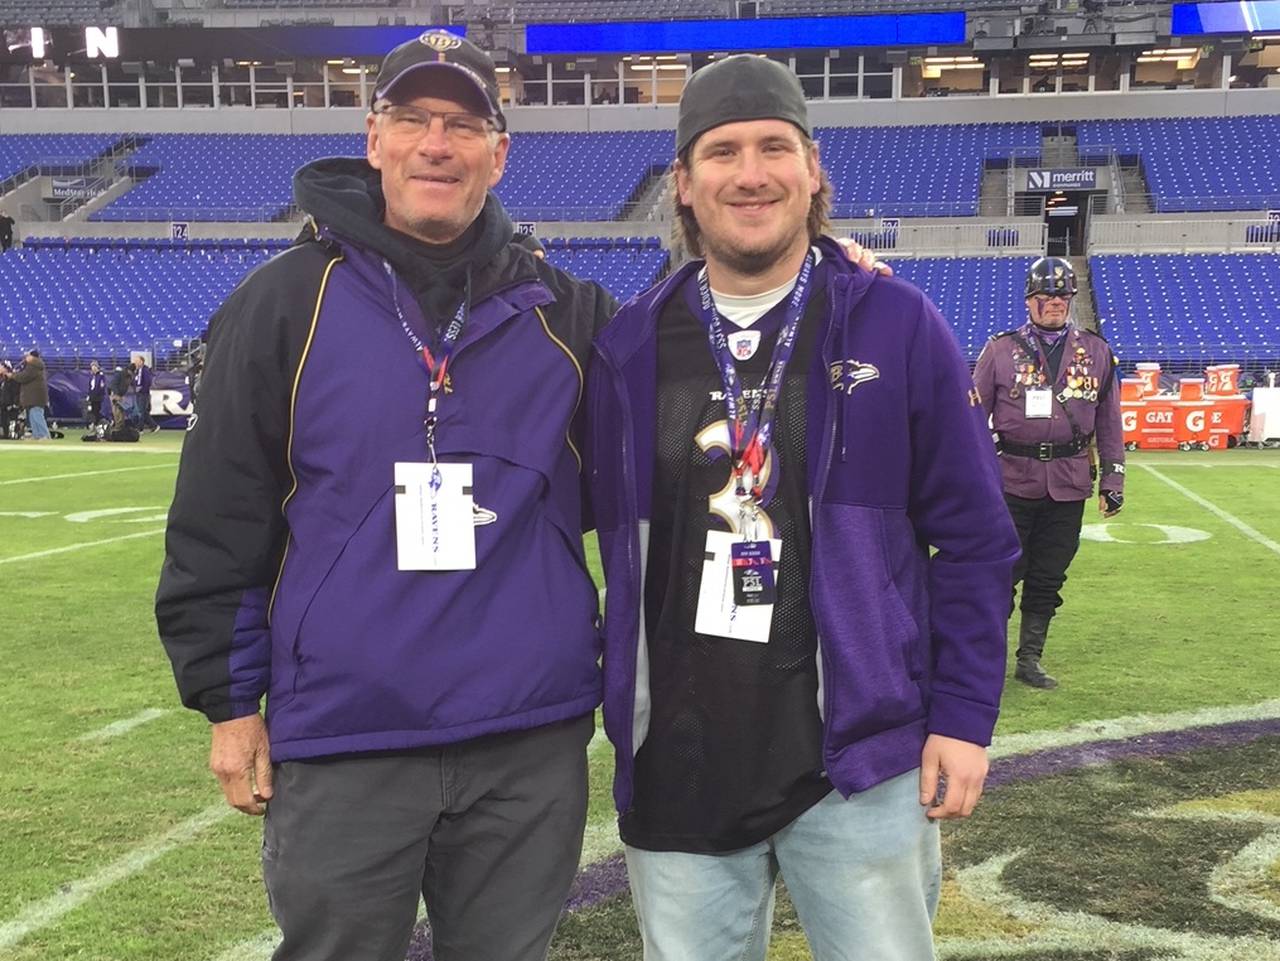 David and Chris Booze had the opportunity to take the field at M&T Bank Stadium in 2019. They attempted field goals, and Chris made one. (Courtesy David Booze)